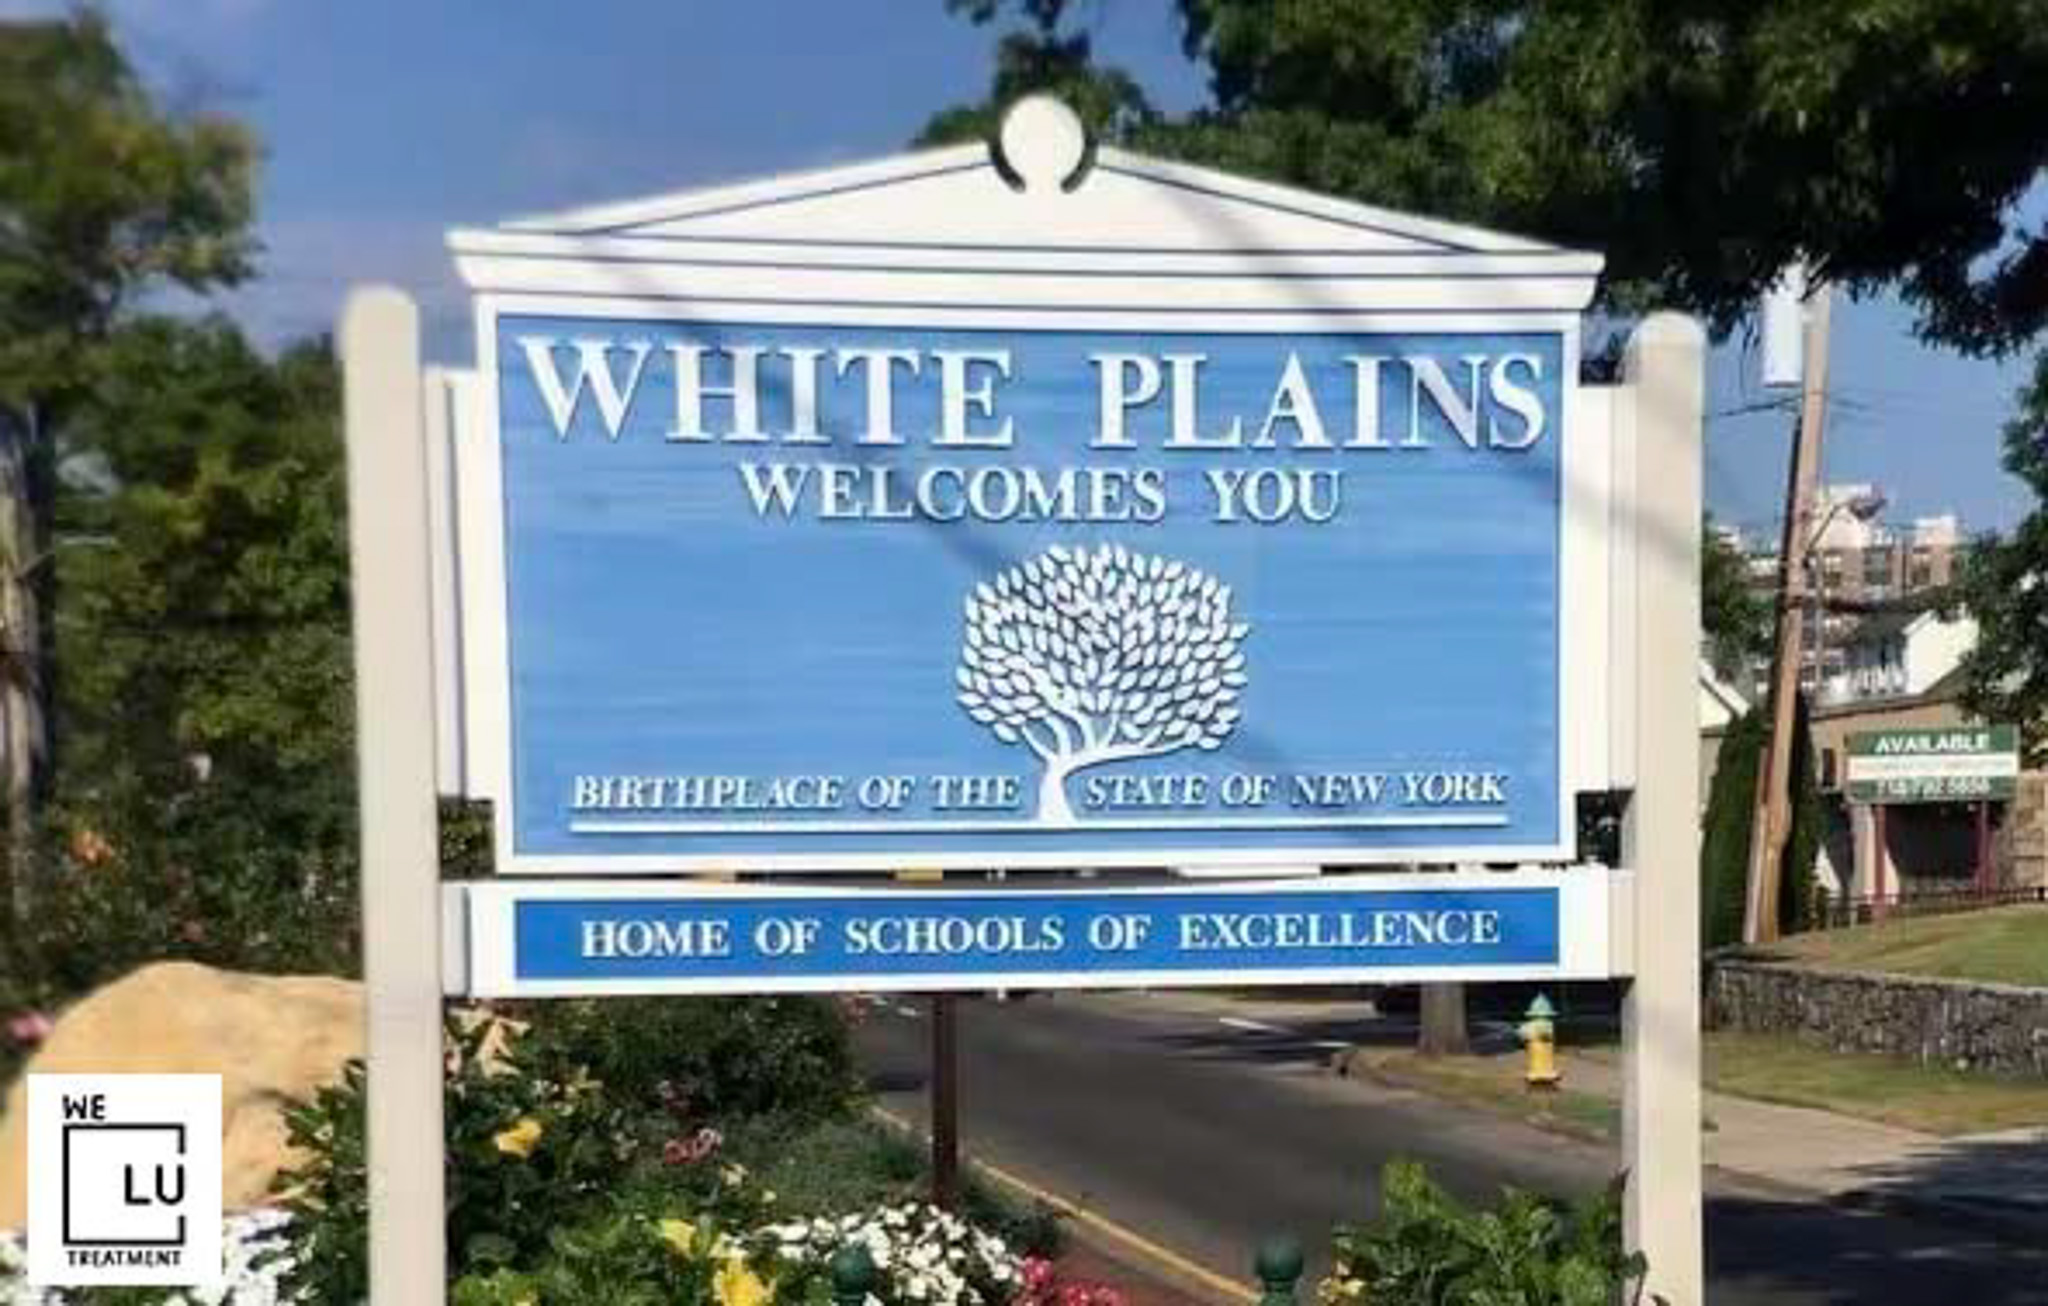 White Plains NY We Level Up treatment center for drug and alcohol rehab detox and mental health services - Image 1